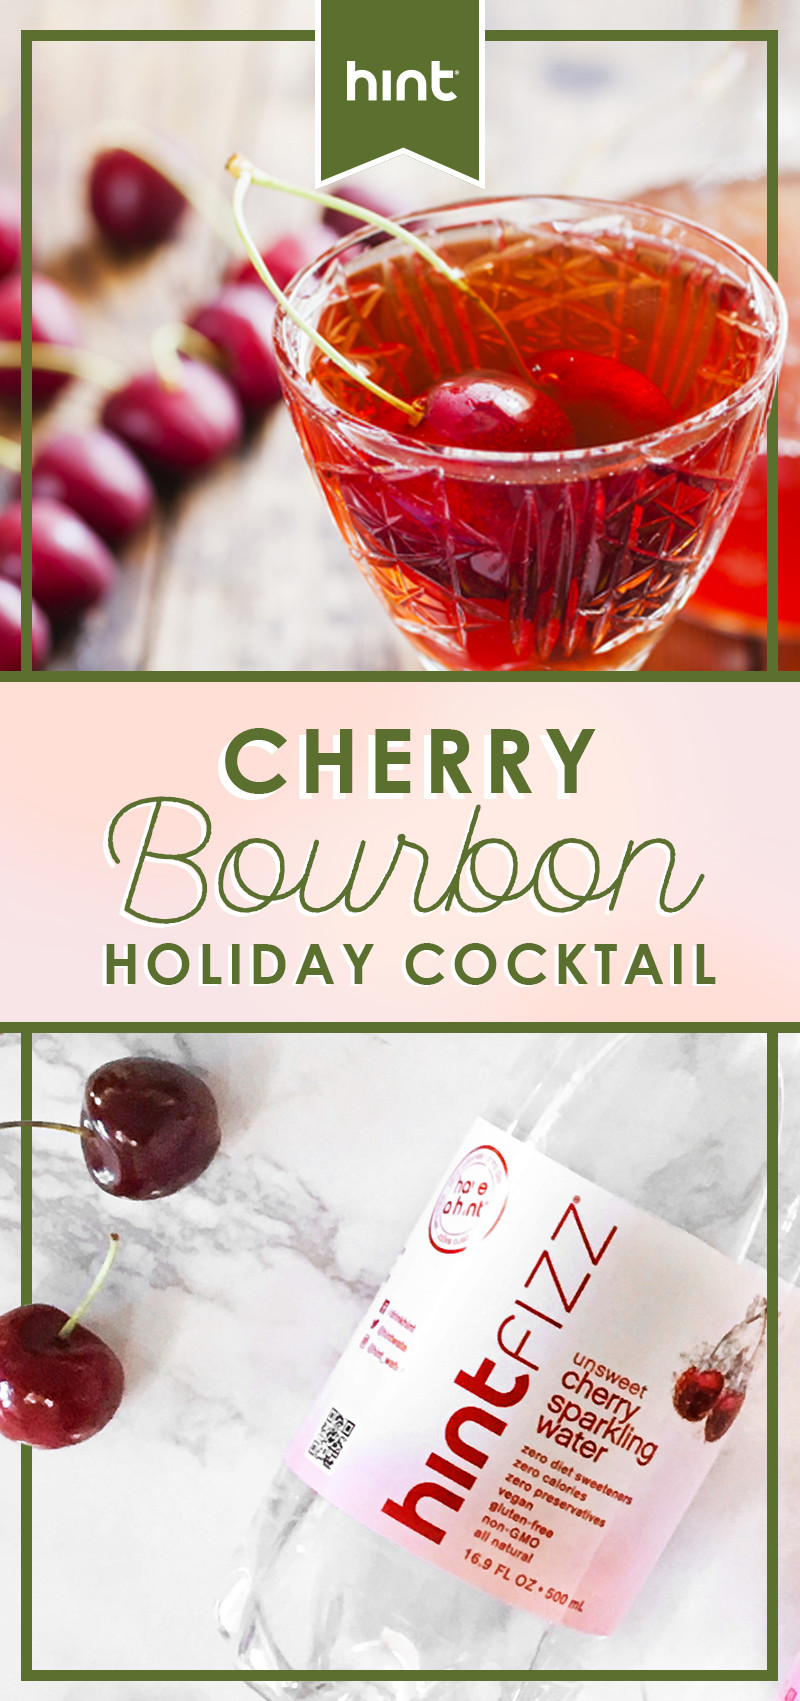 Holiday Drinks With Bourbon
 Cherry Bourbon Holiday Cocktail by hint